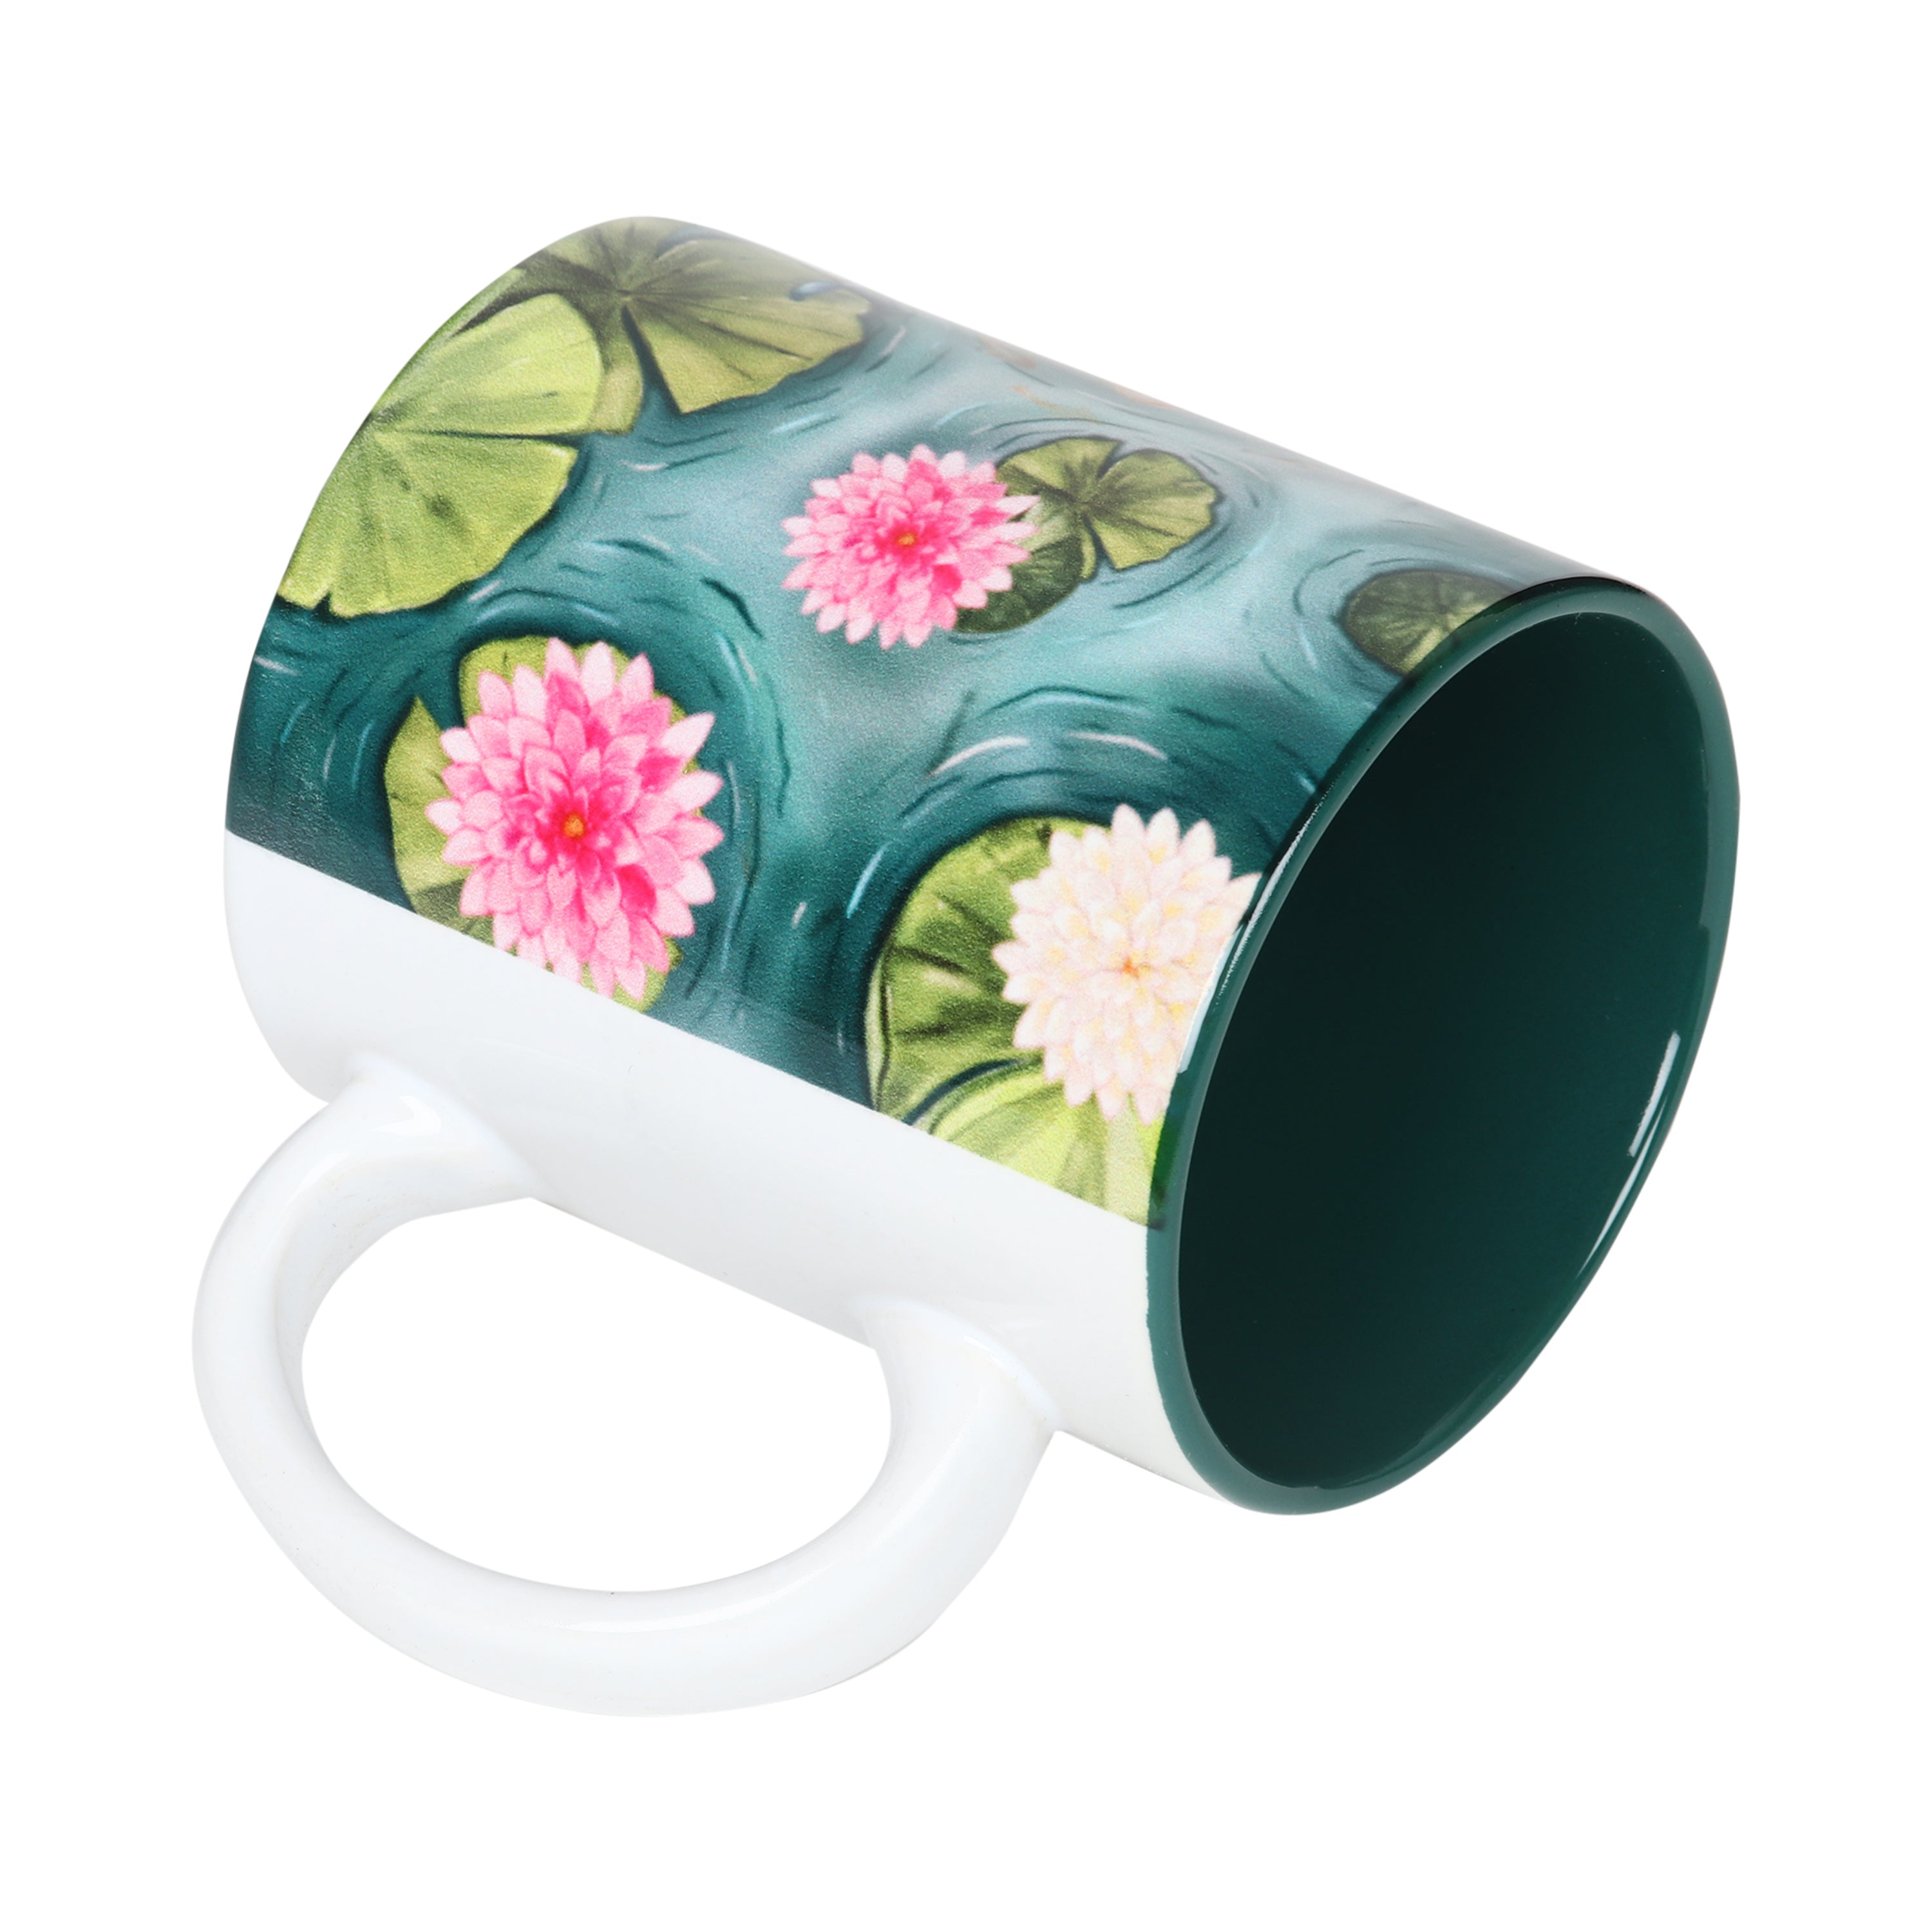 Mugs - The Water Tale of Dragonflies